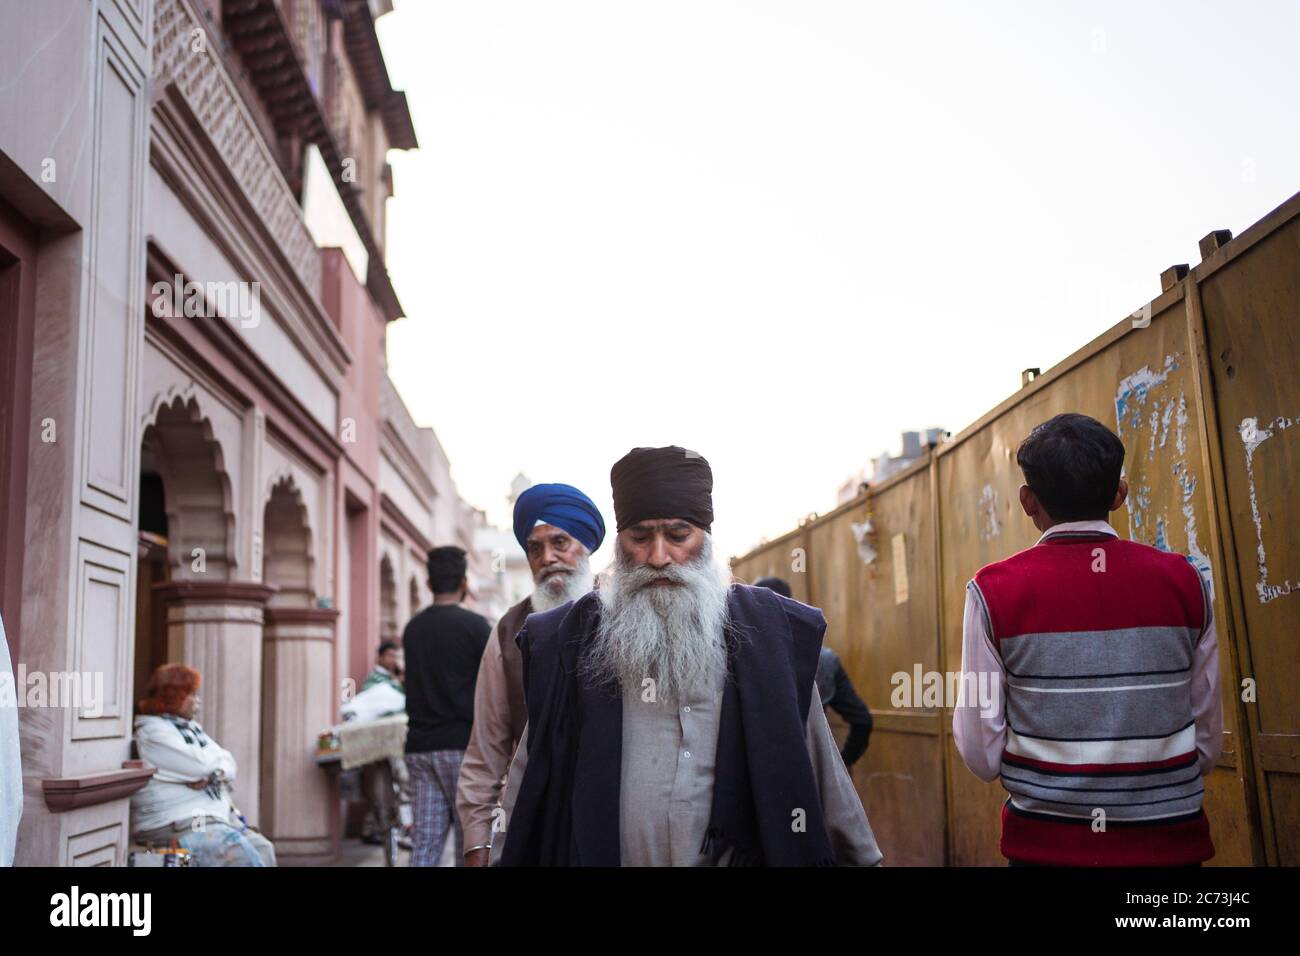 New Delhi / India - February 18, 2020: candid portrait of Sikh Indian old men with white beard in Old Delhi Stock Photo